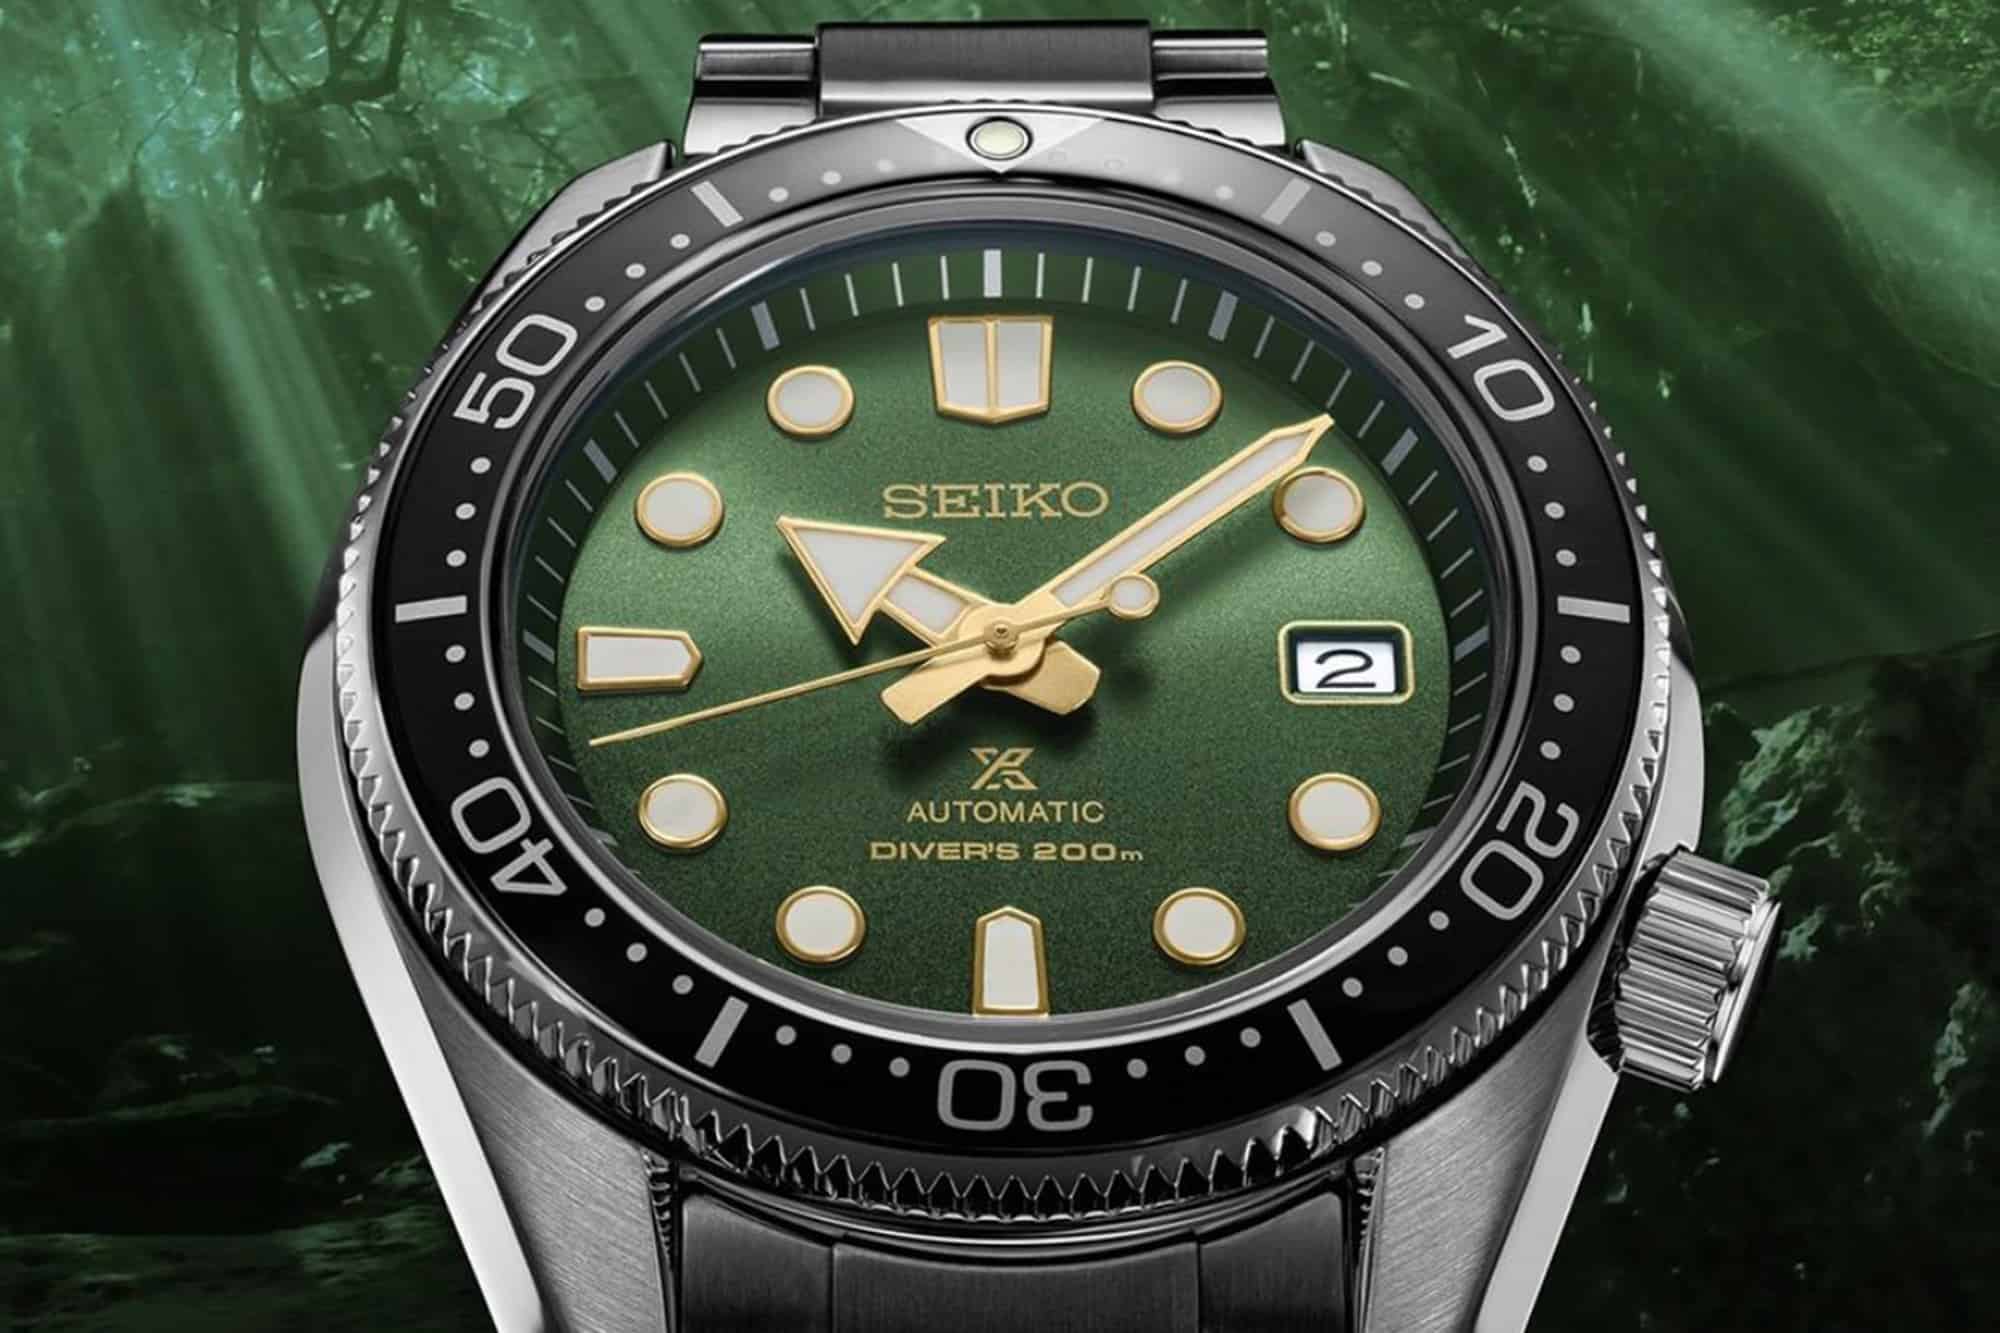 Introducing the Seiko Prospex 200m Diver Ref. SPB105 with Dial and Gold Accents - Worn & Wound